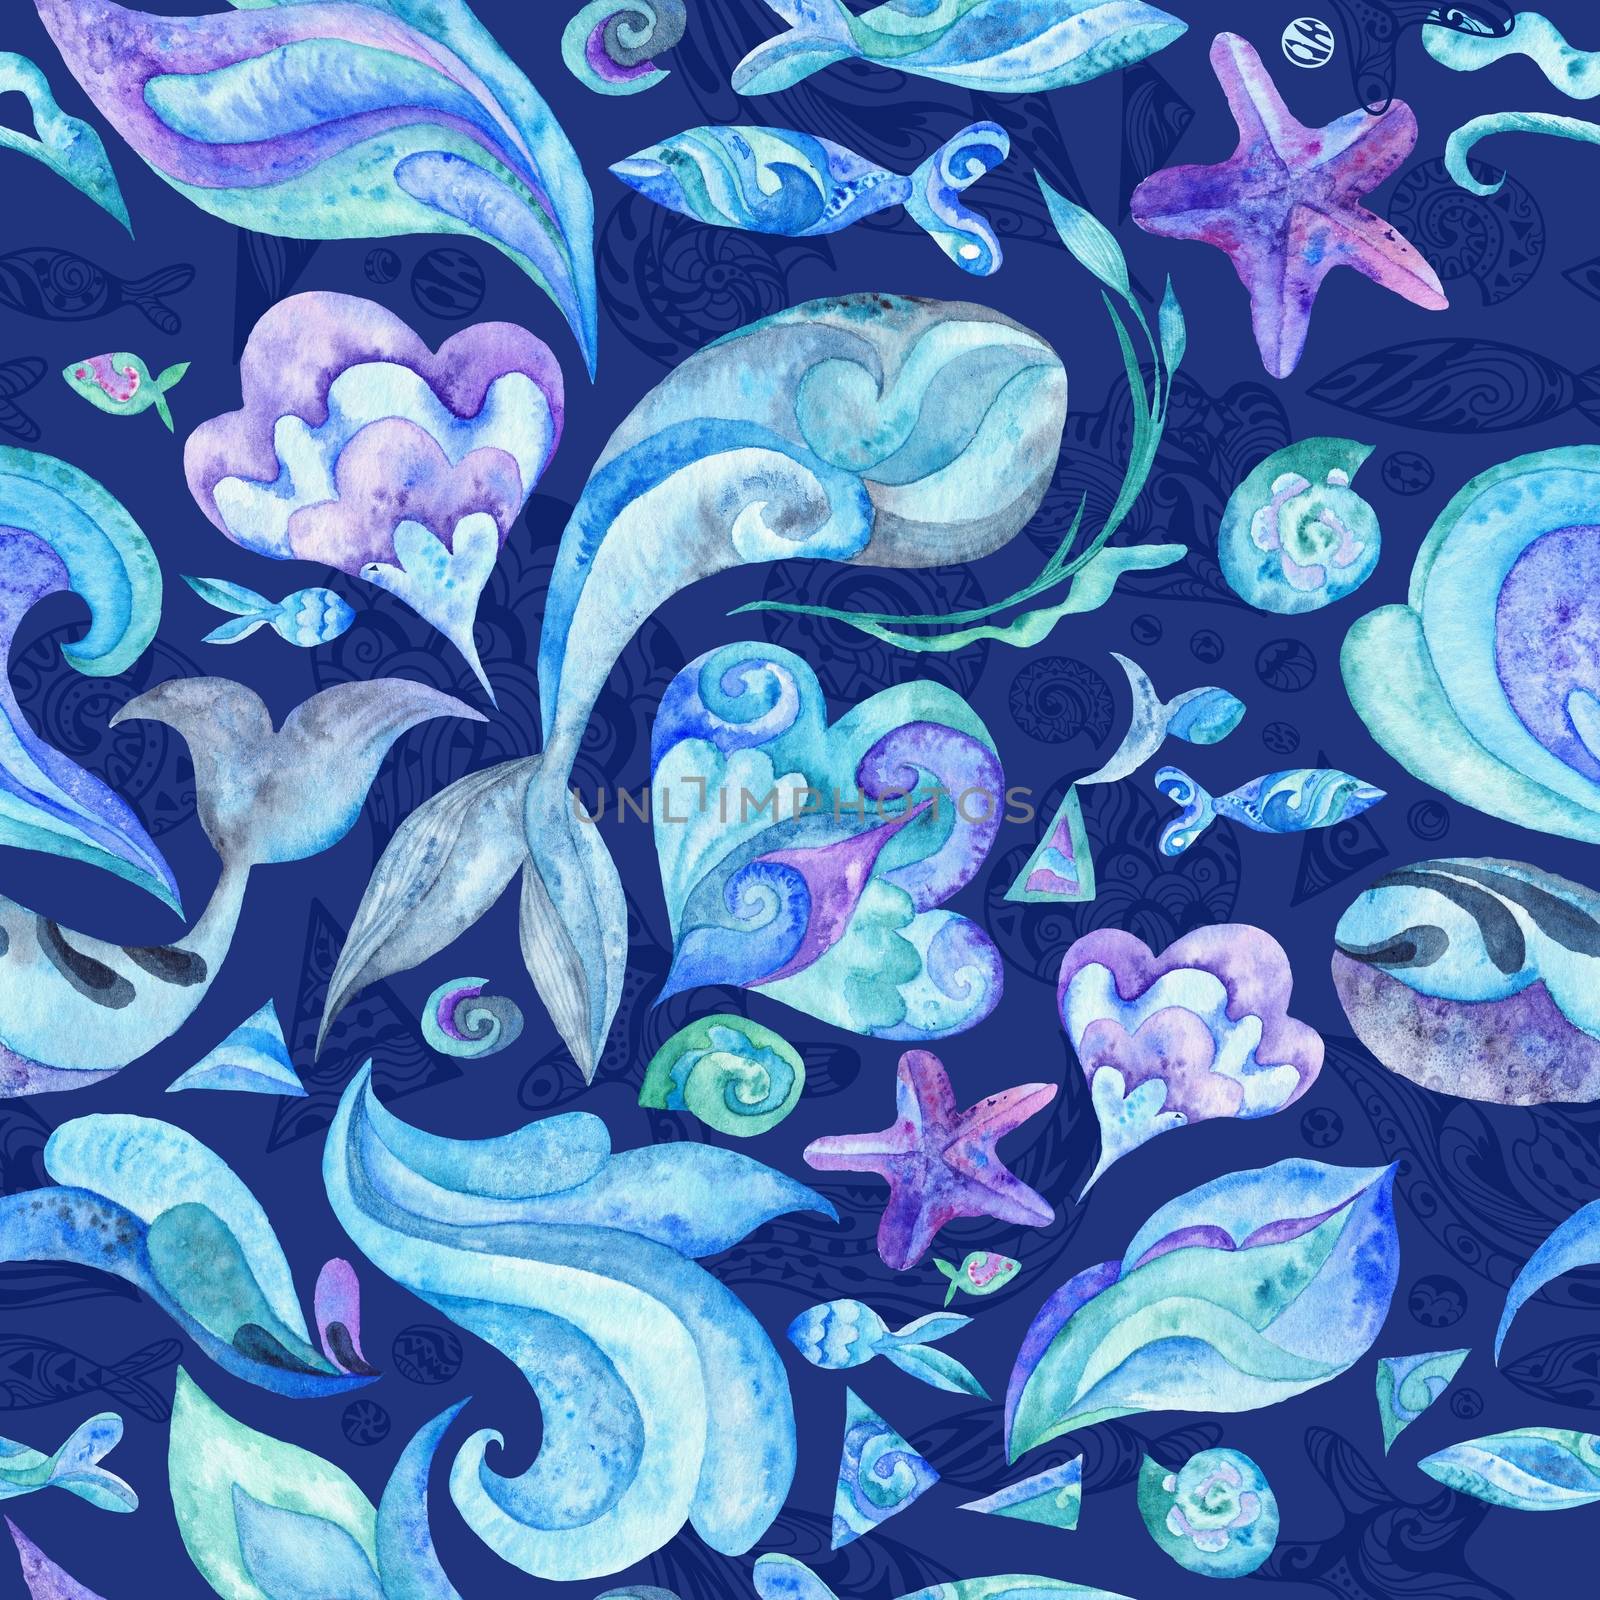 Nautical underwater texture with fishes, whales, starfishes, shells and waves isolated on blue background for wallpaper and fabric design